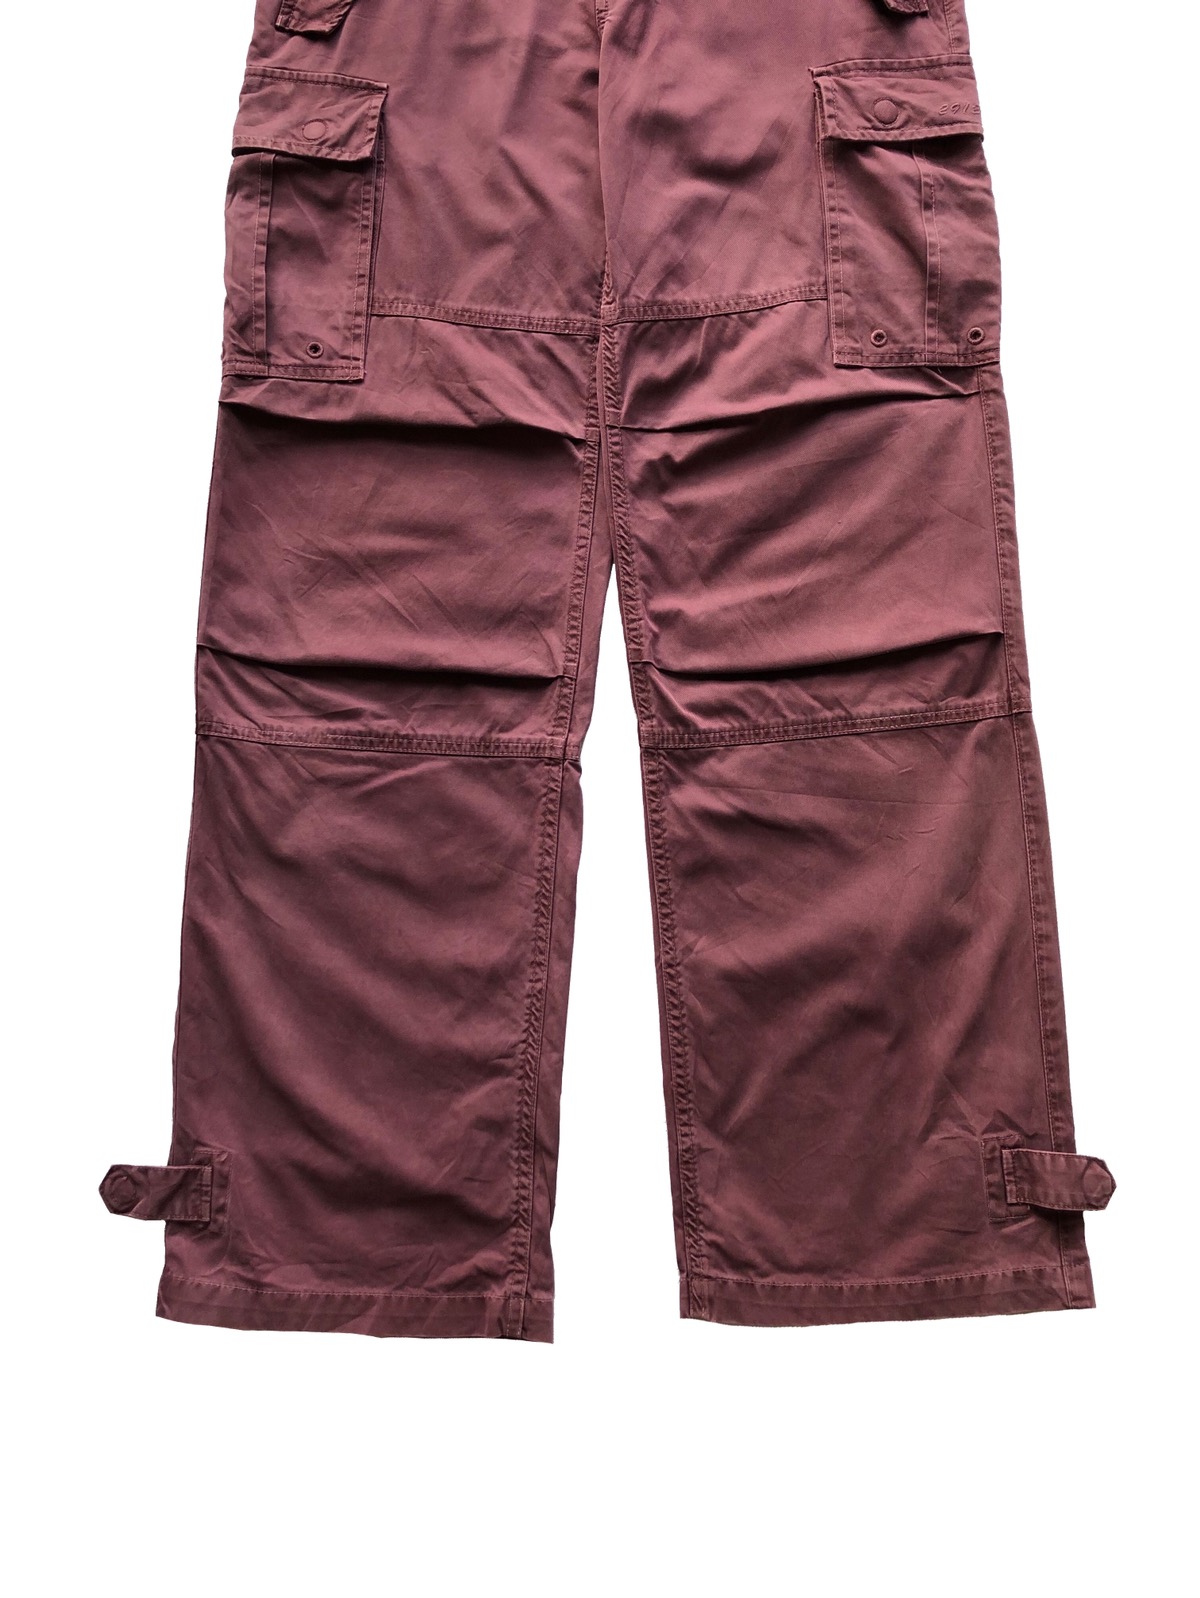 Japanese Brand - 1990s 291295 Homme Military Cargo Trousers - 4